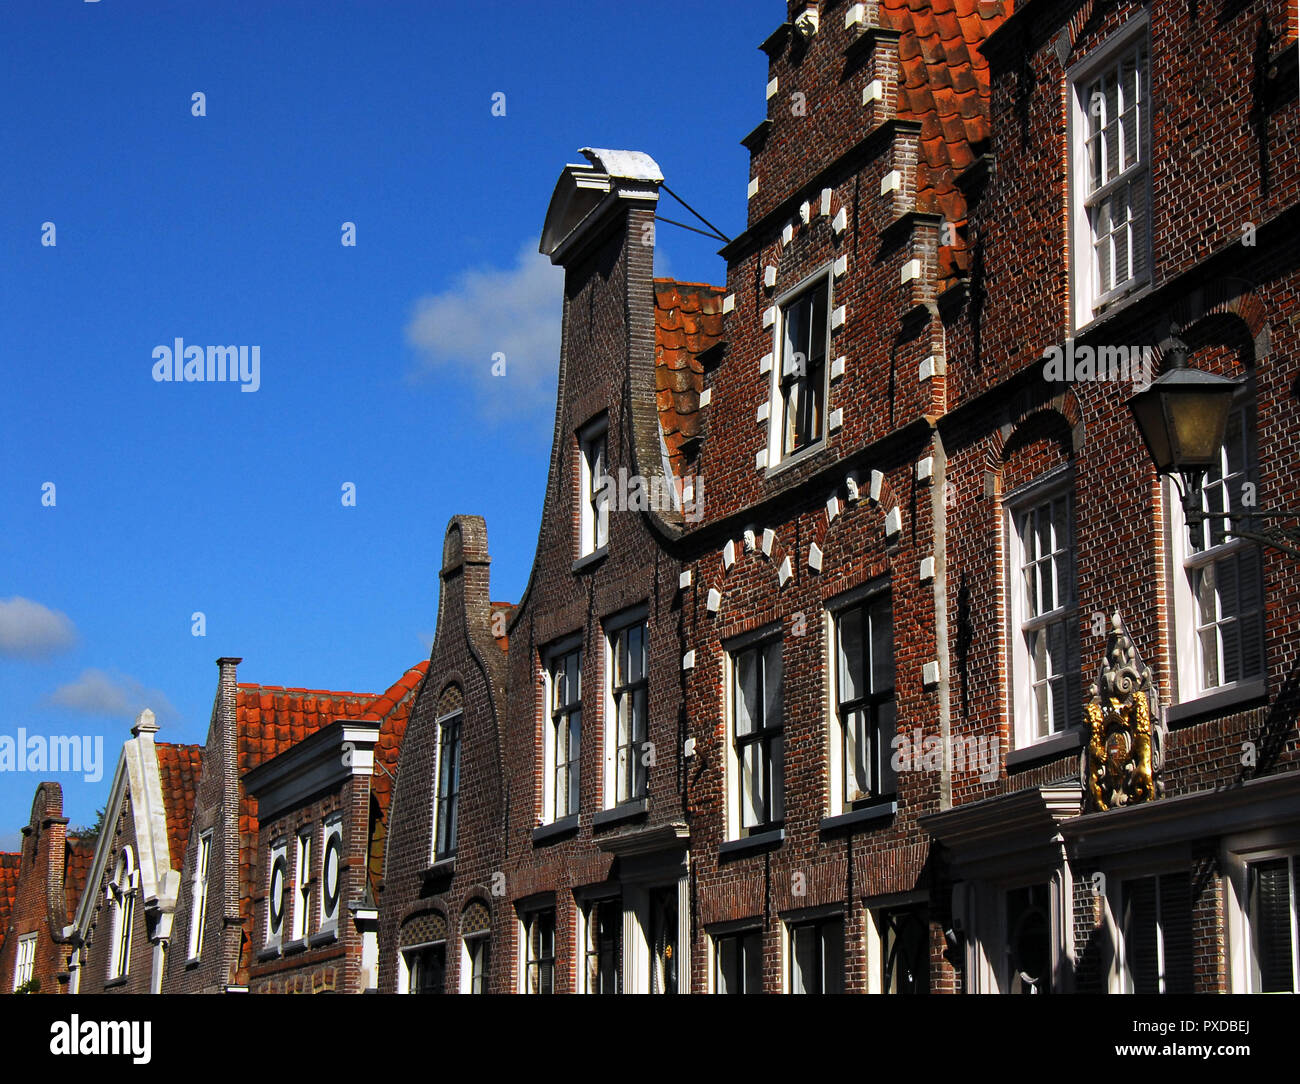 Beautiful traditional architectural details on a residential street in the charming, historical village of Edam, The Netherlands. Stock Photo